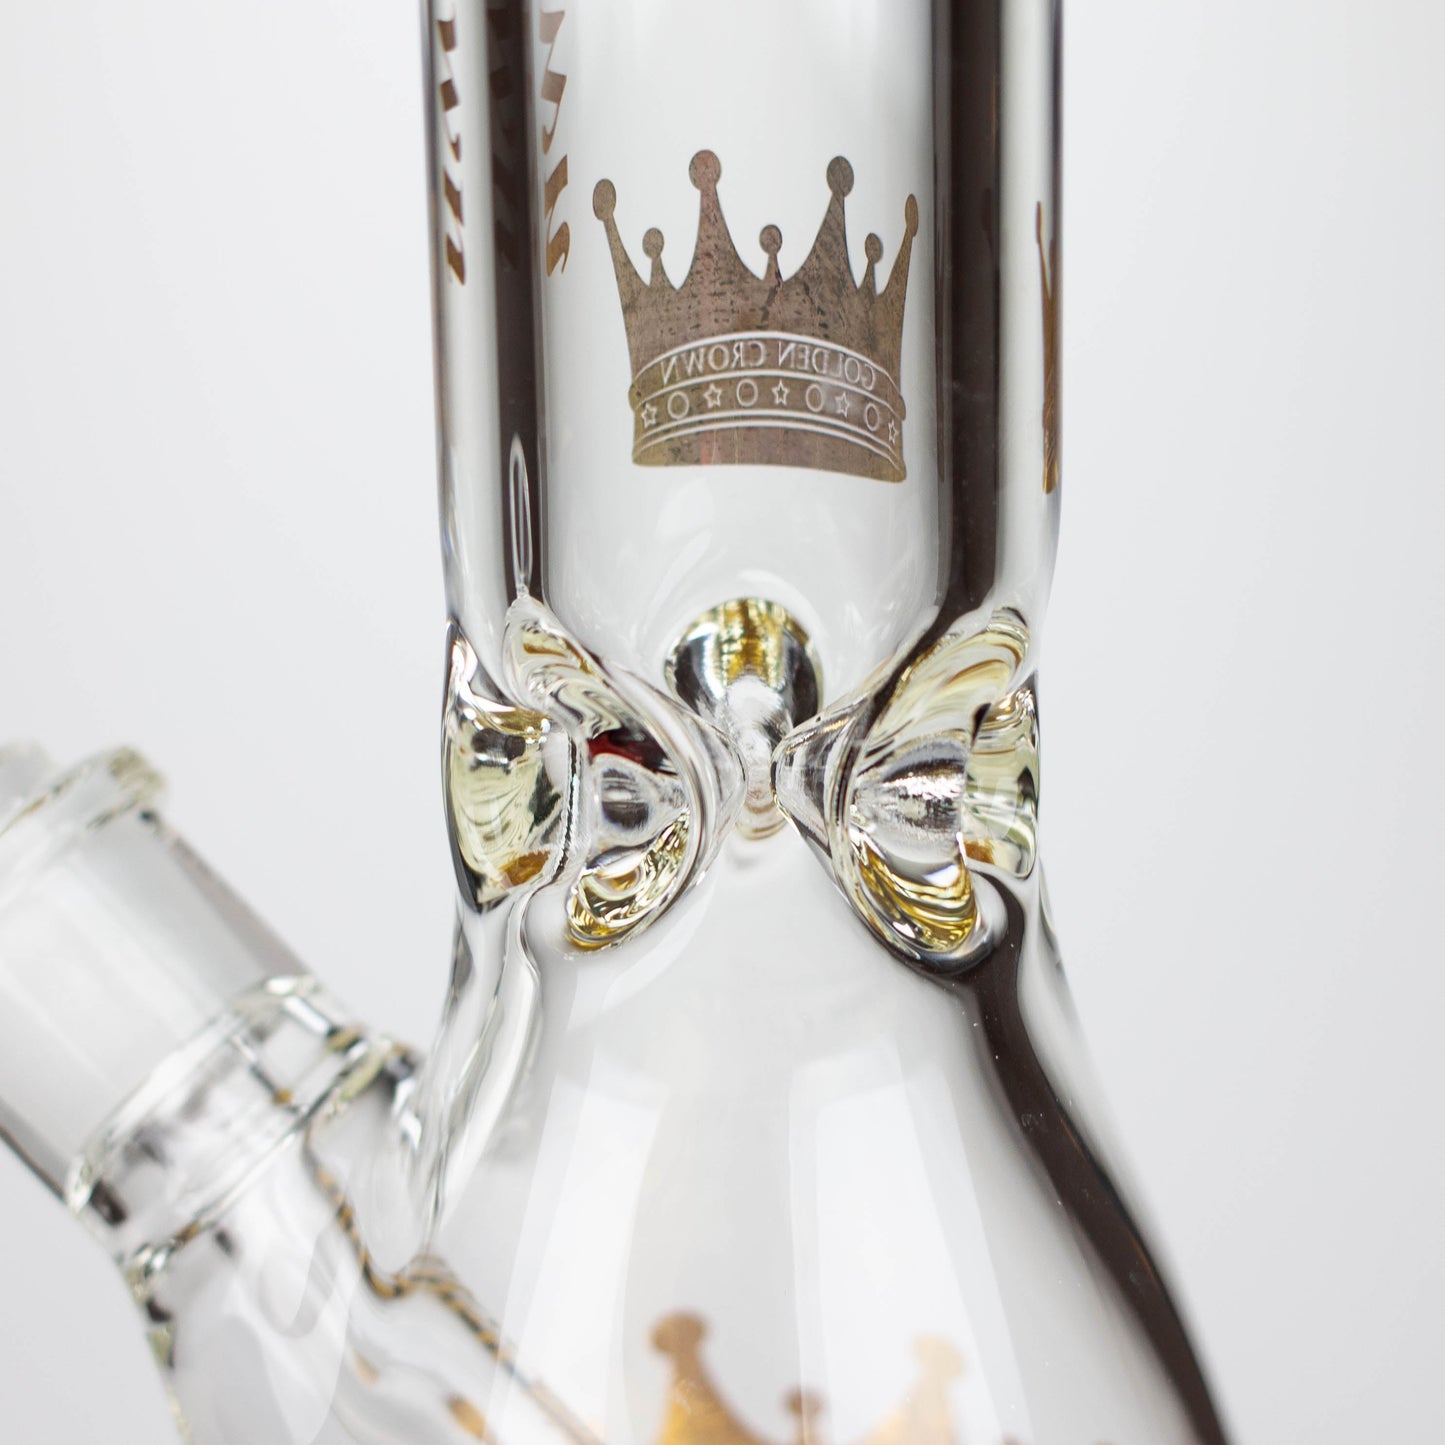 Golden Crown™ | 14 Inch 9mm glass bong with Signature and 24K Gold Emblem_9